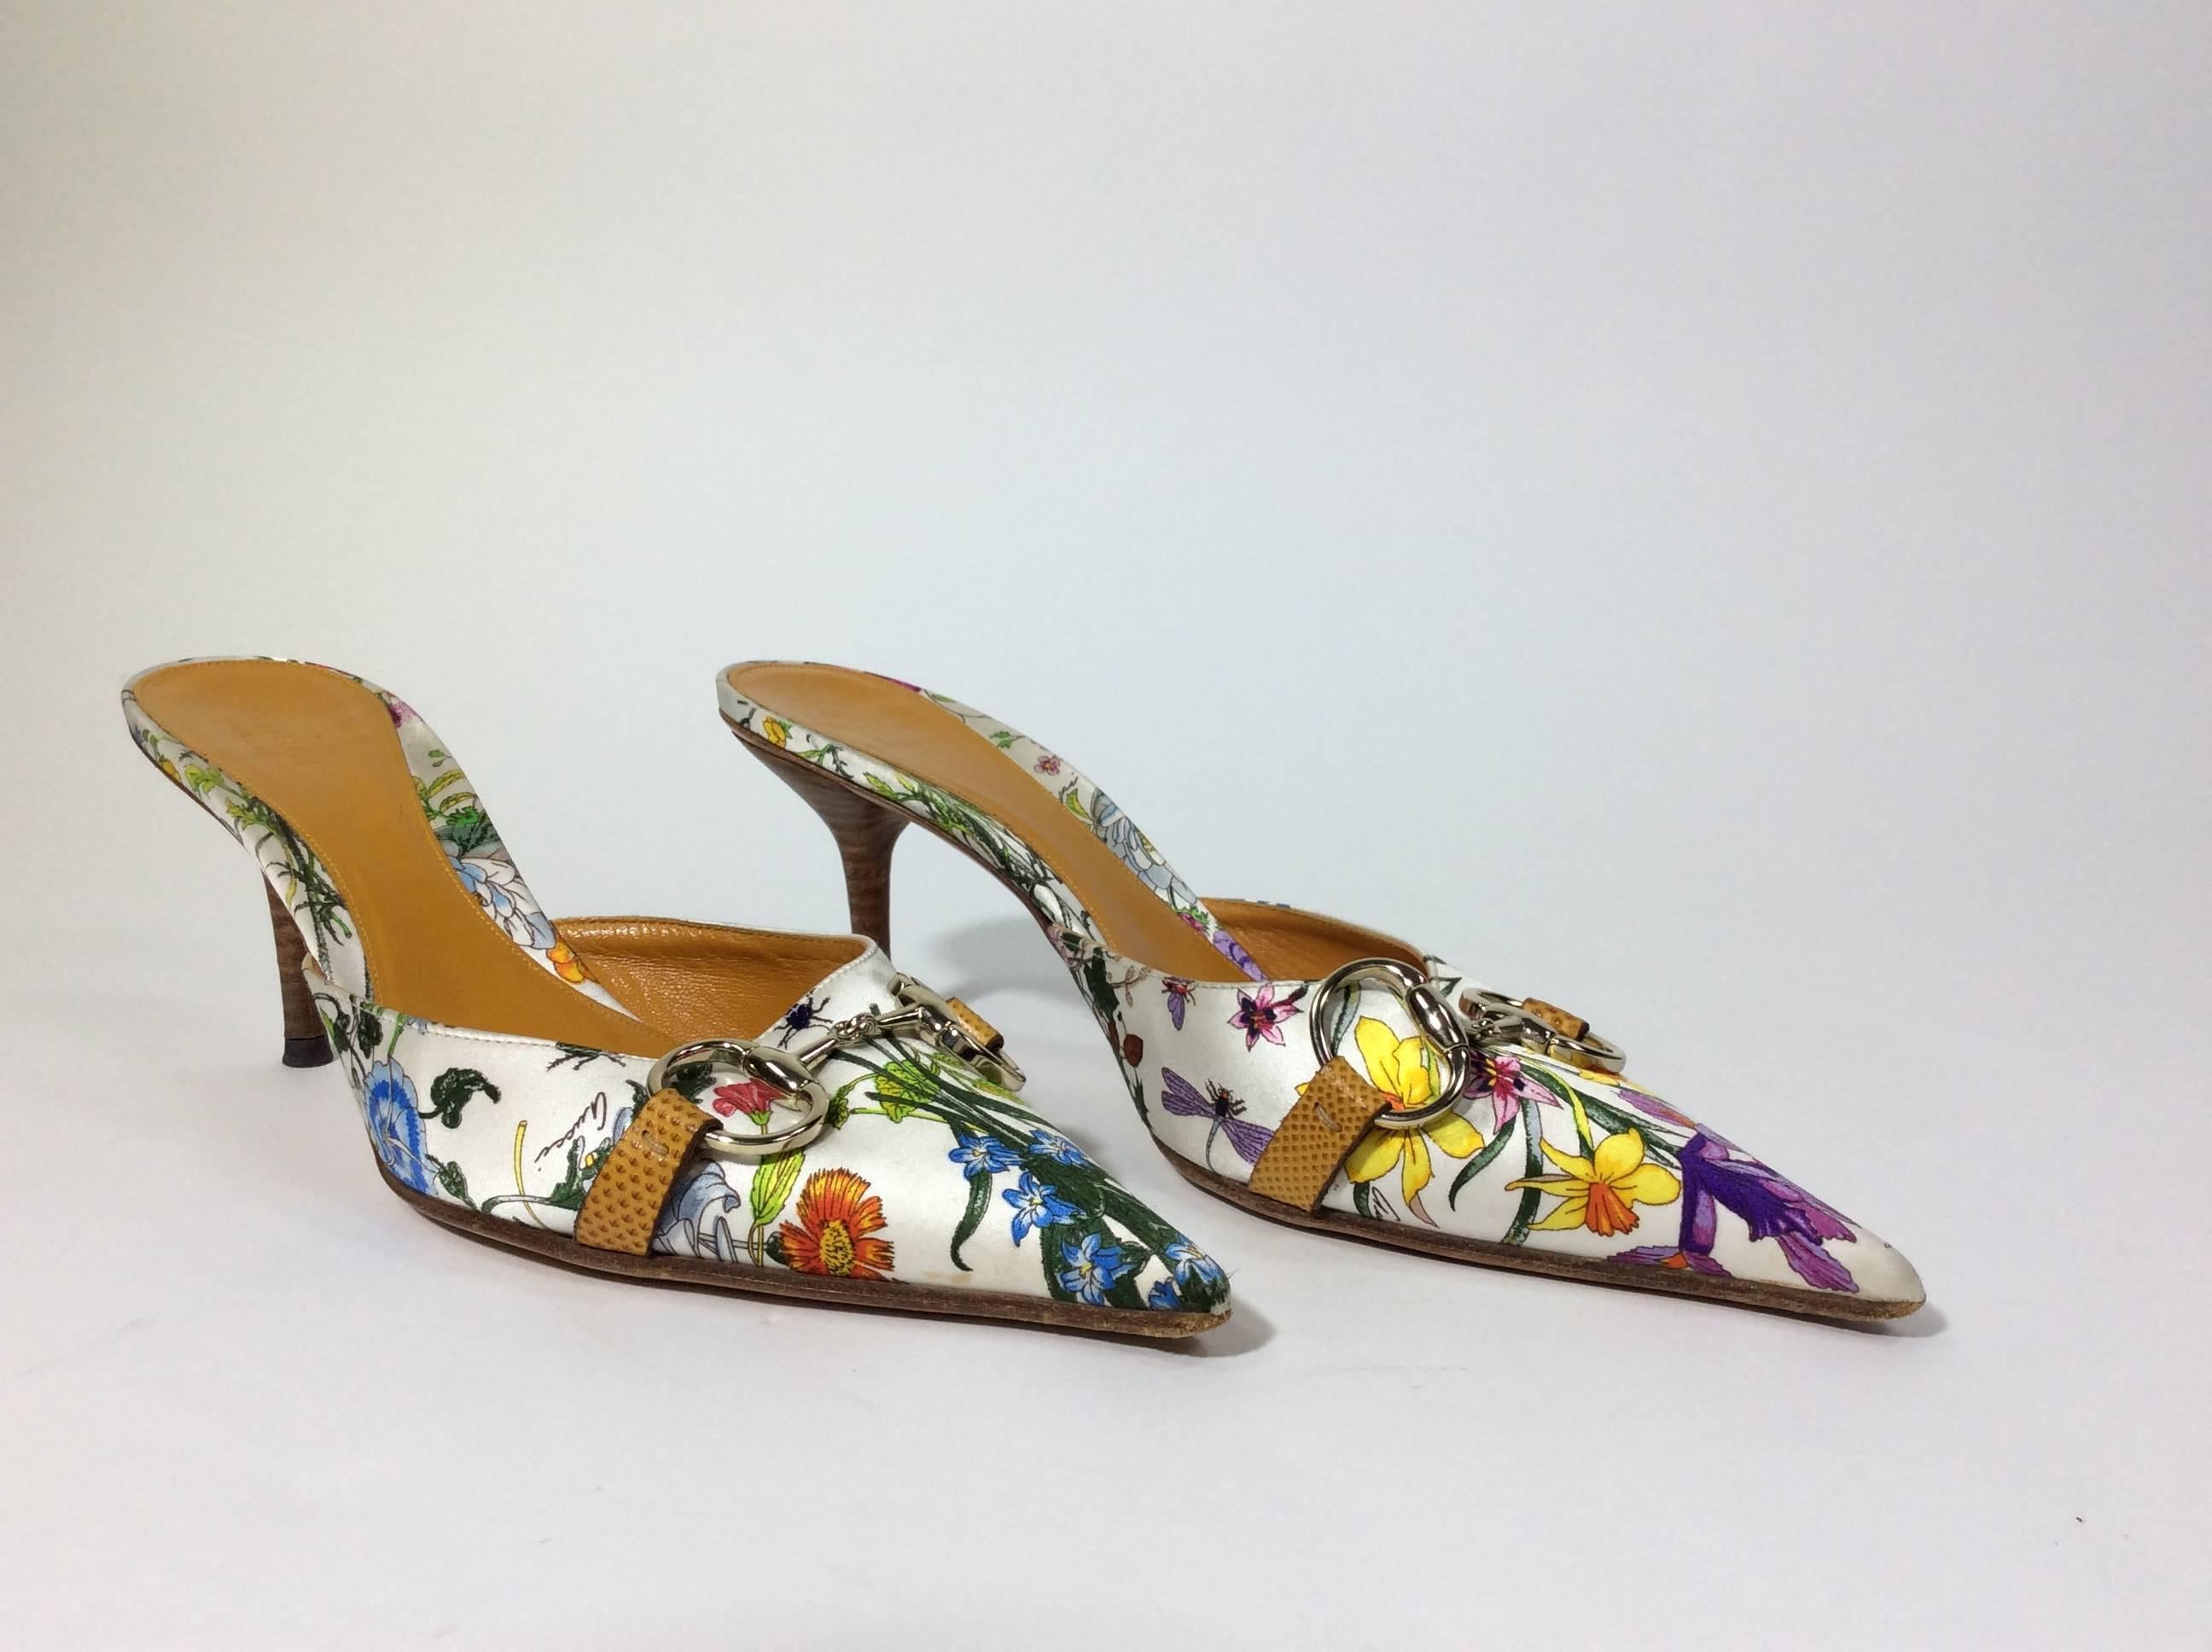 Gucci Satin Floral Slides In Good Condition For Sale In Narberth, PA